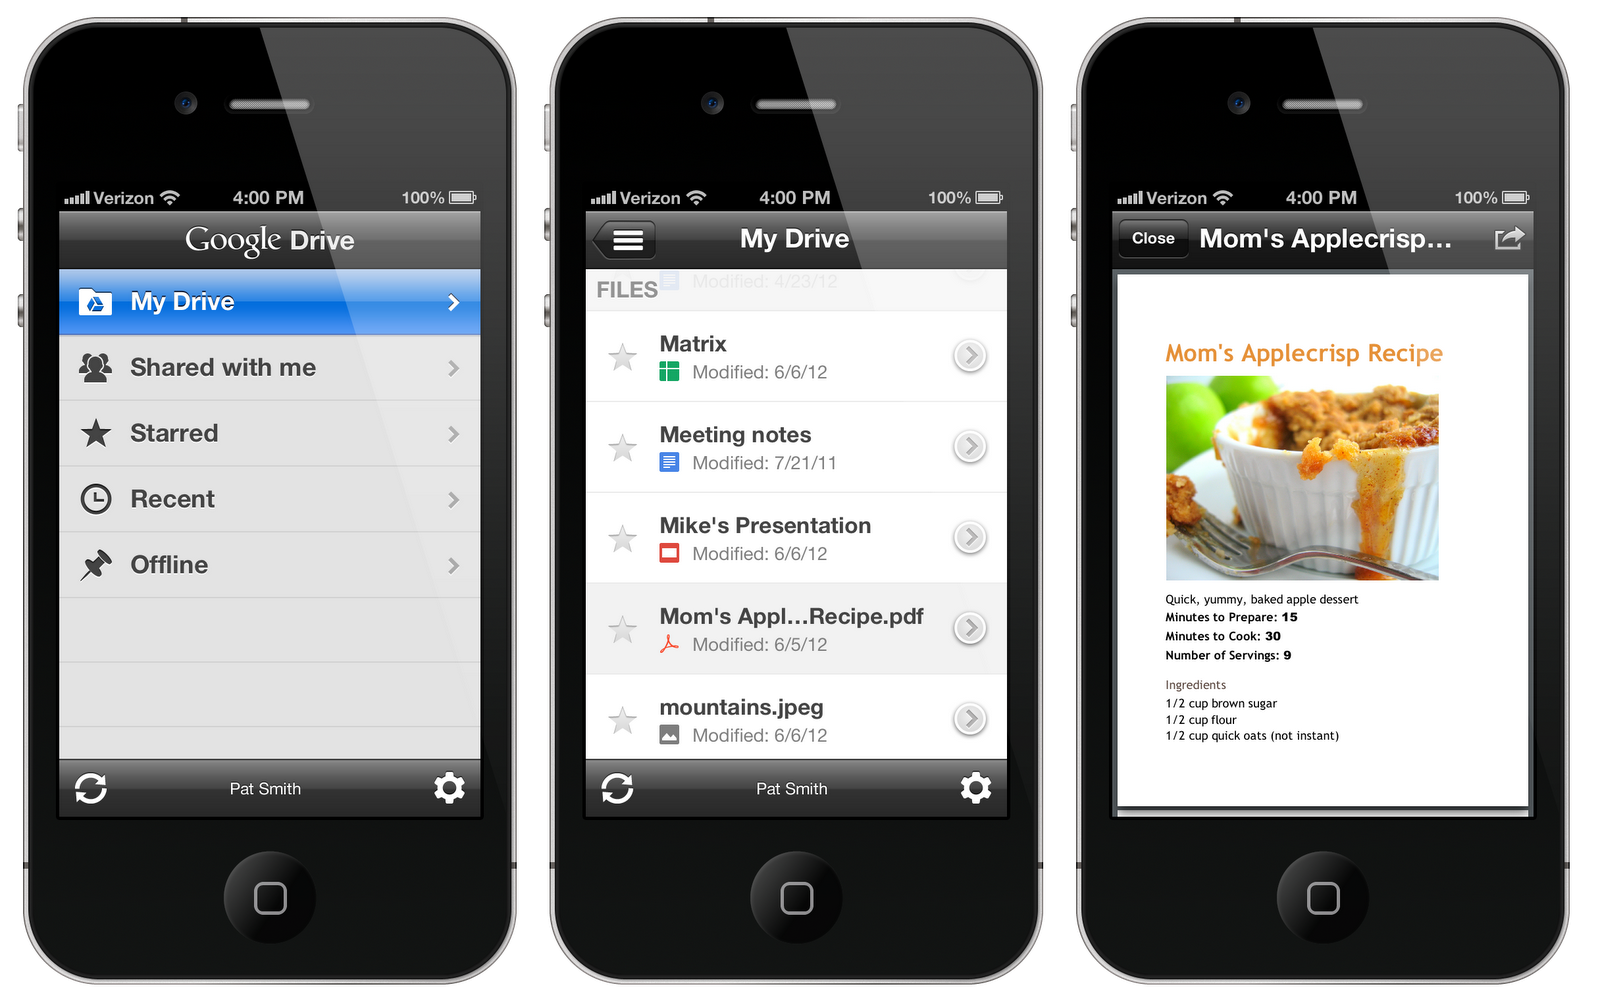 Google Drive is available on iPhone, iPad and iPod Touch from today